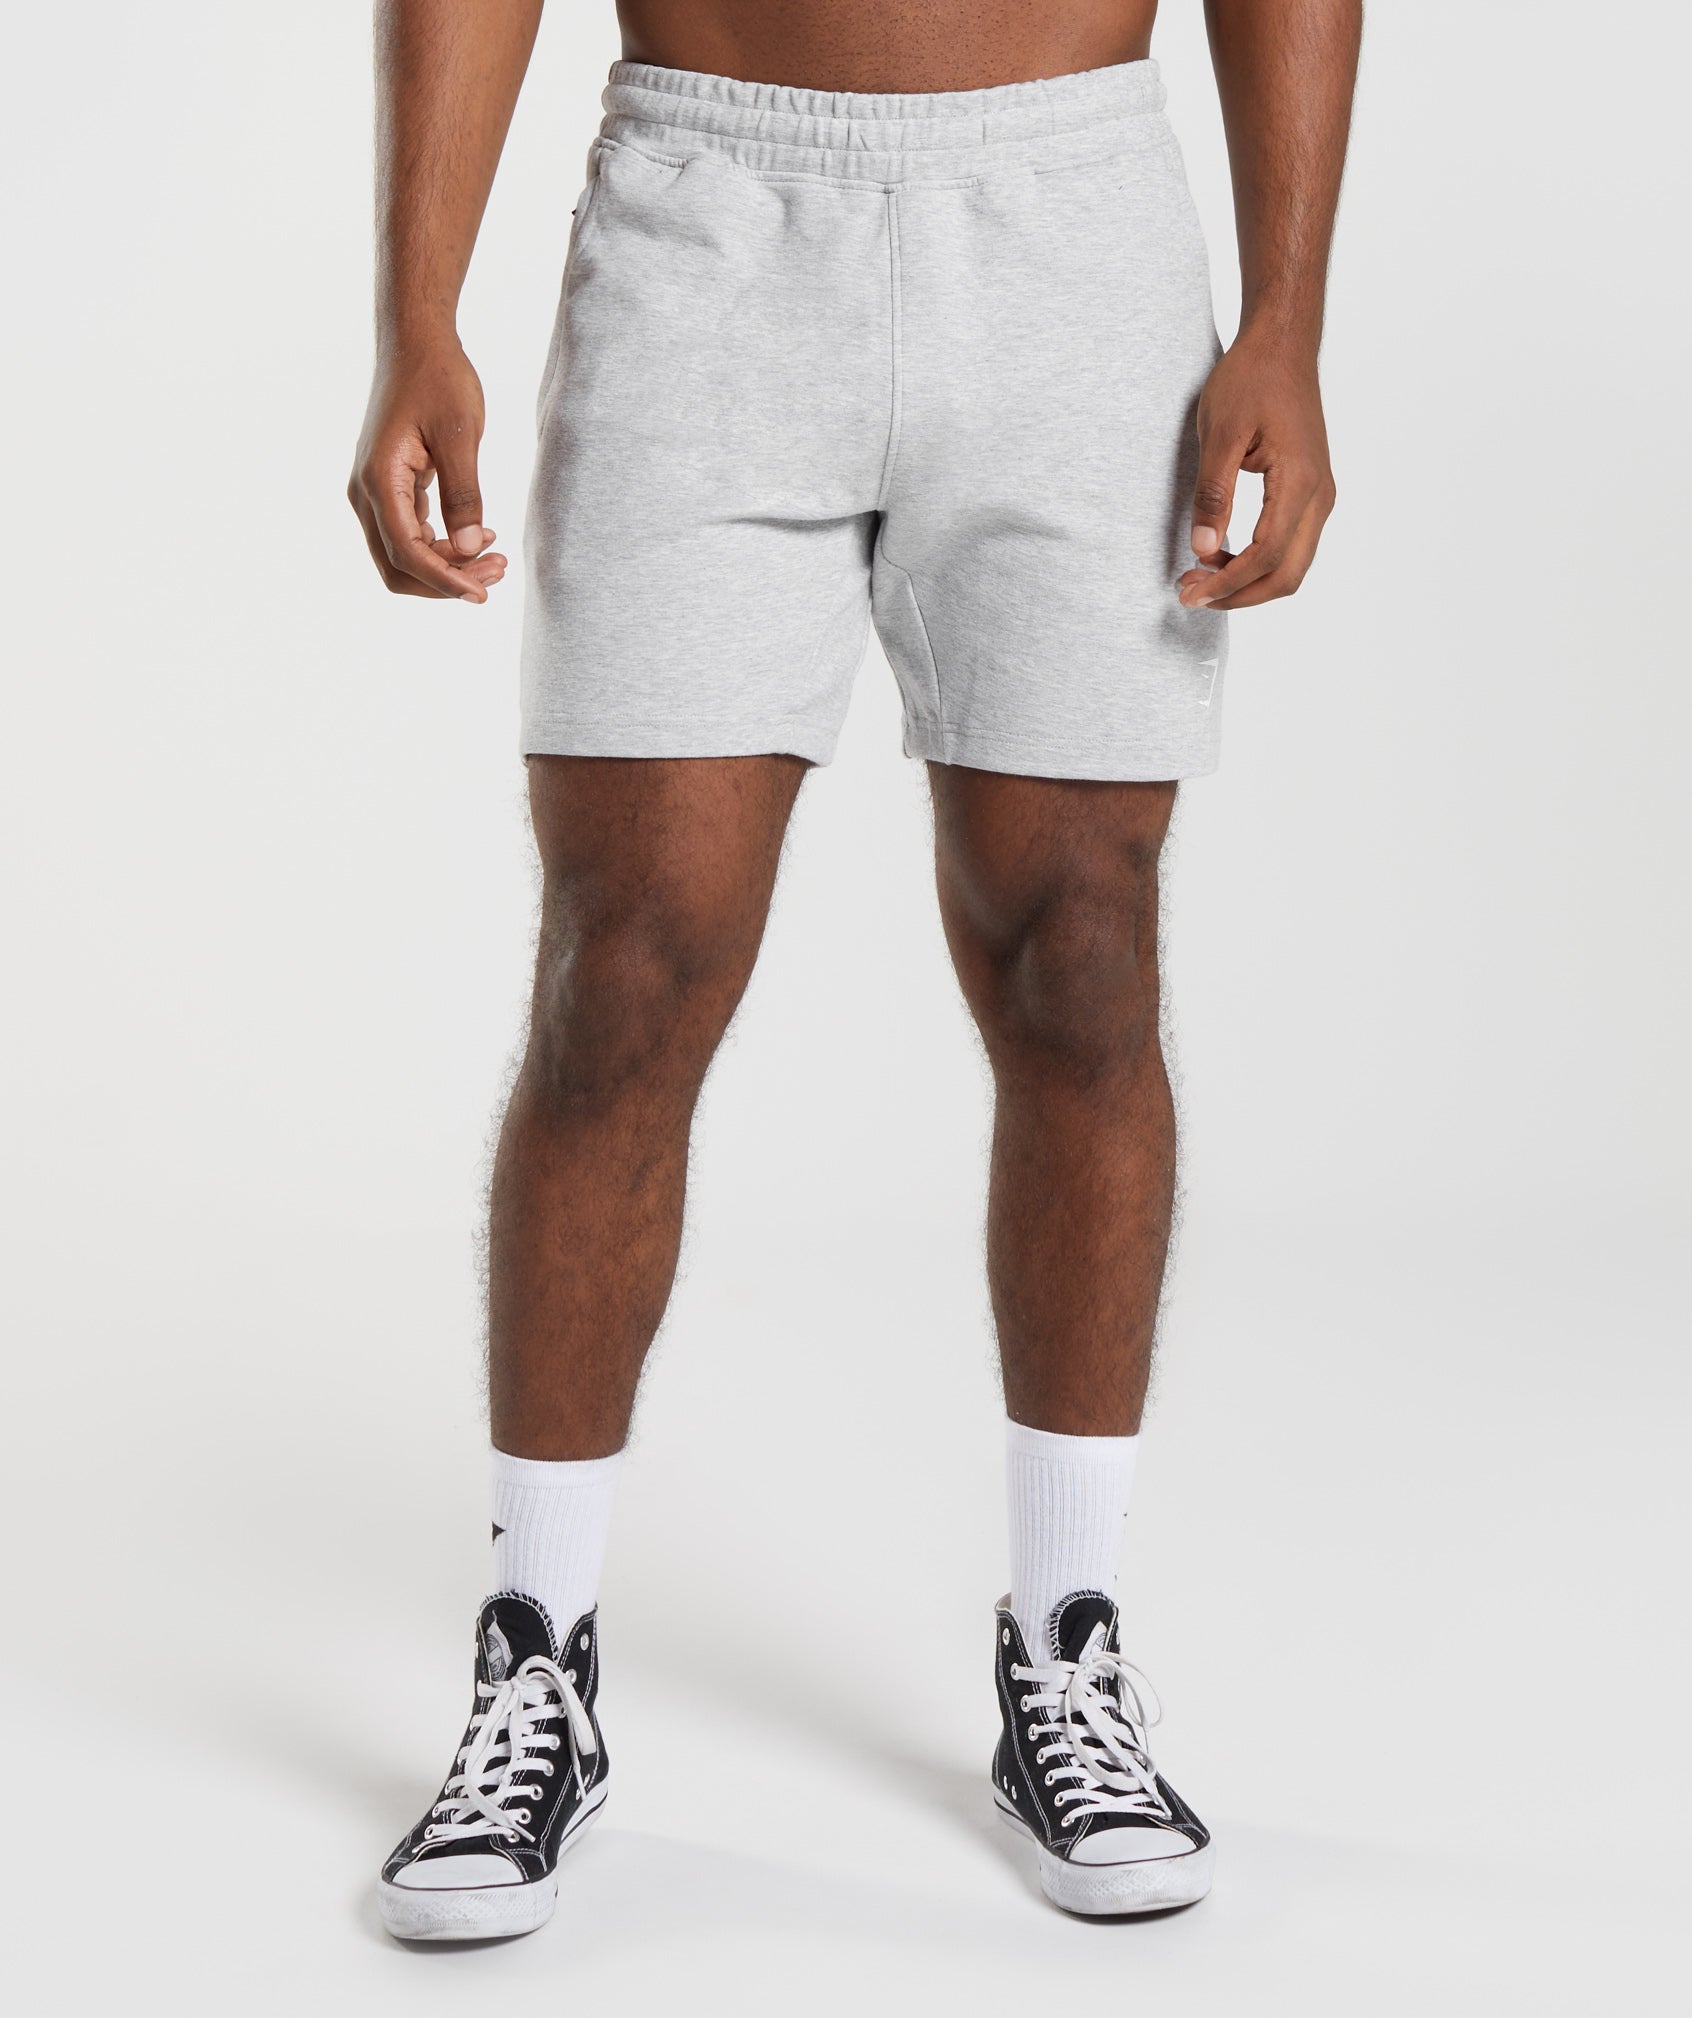 React 7" Shorts in Light Grey Core Marl - view 1